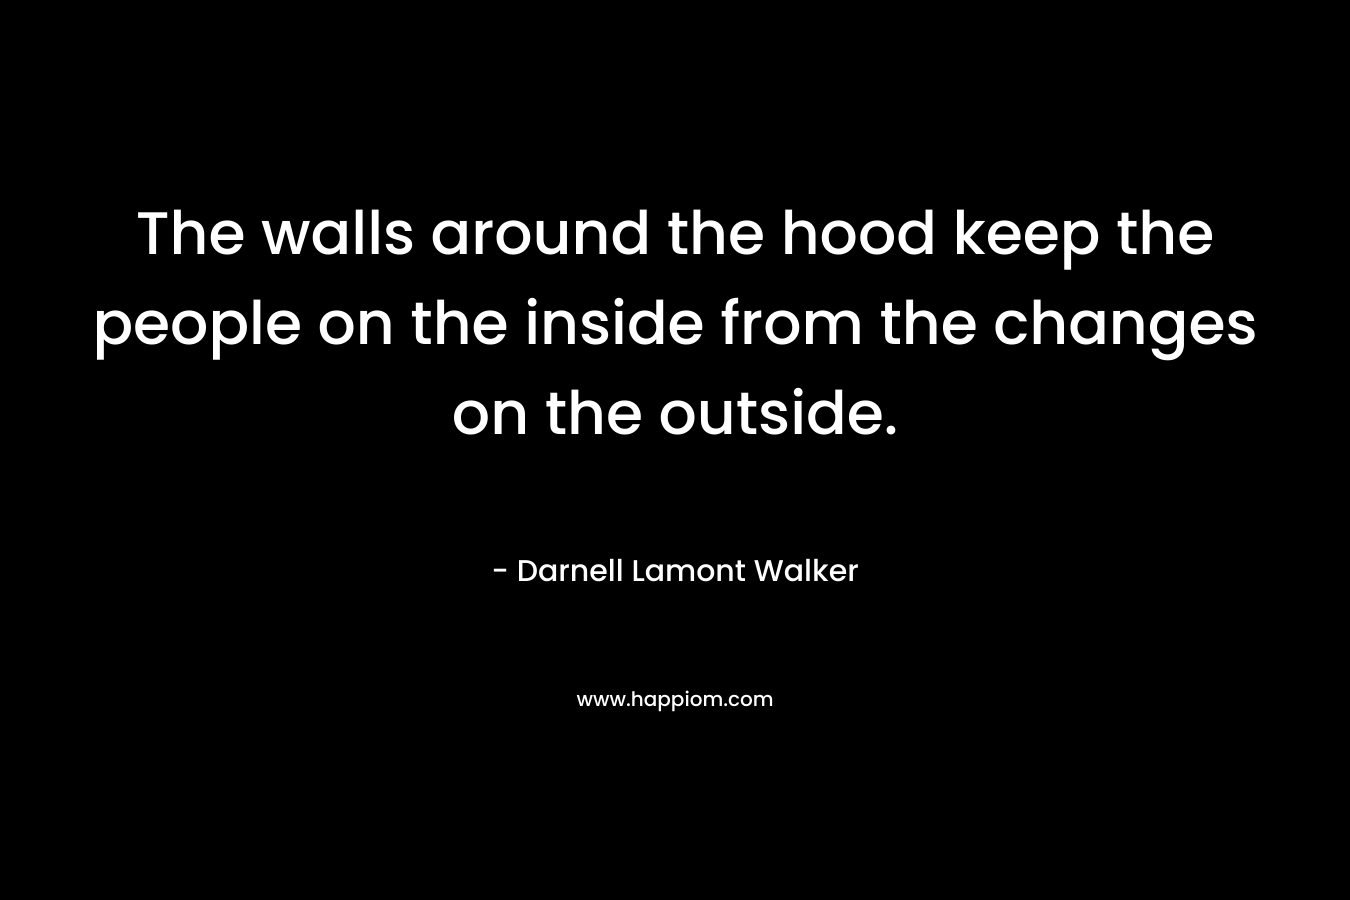 The walls around the hood keep the people on the inside from the changes on the outside.